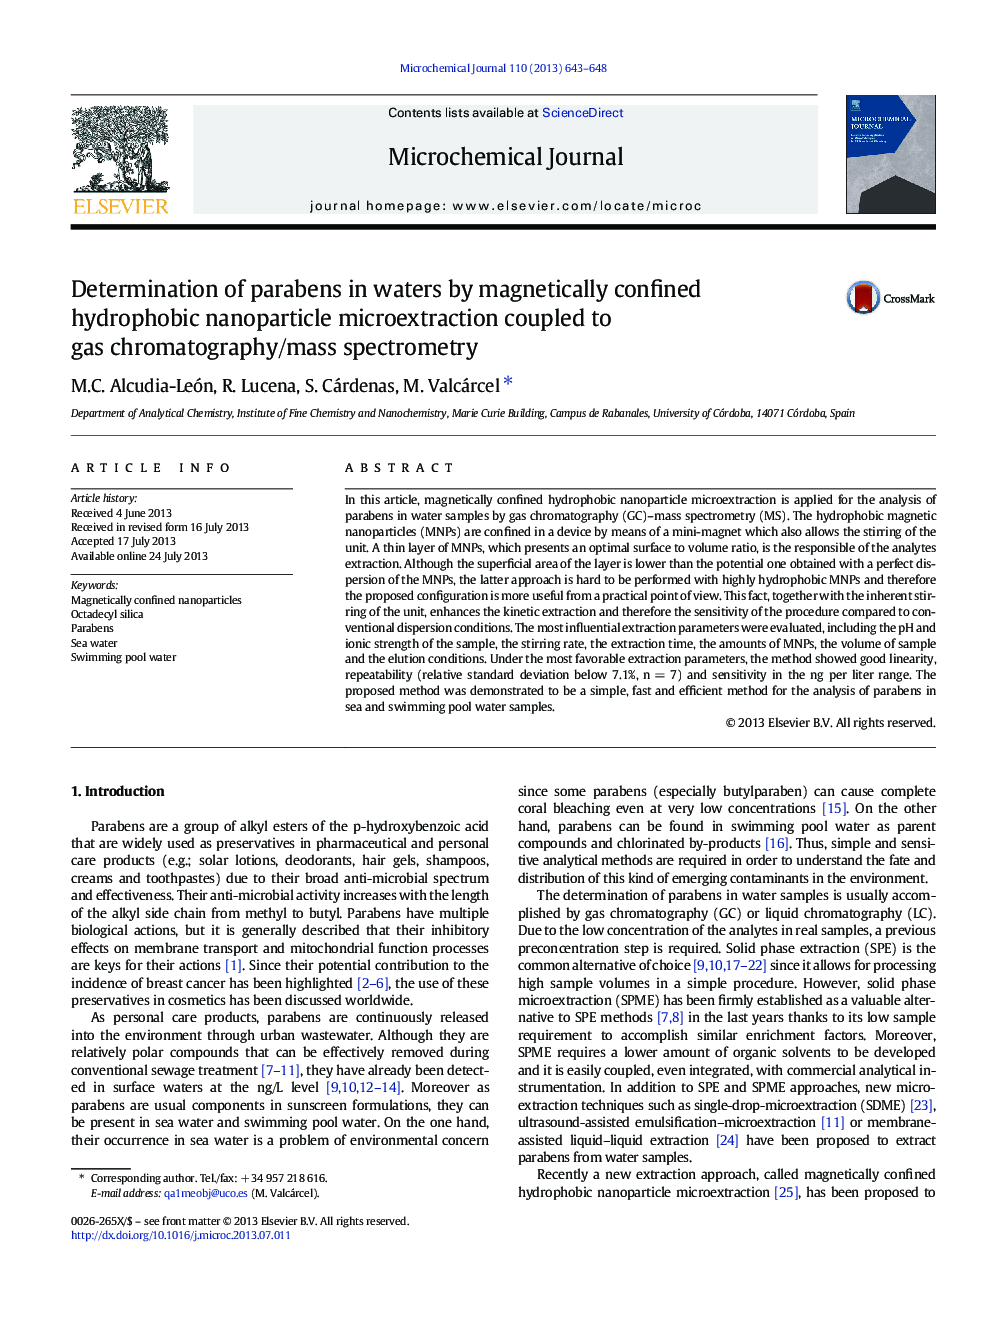 Determination of parabens in waters by magnetically confined hydrophobic nanoparticle microextraction coupled to gas chromatography/mass spectrometry